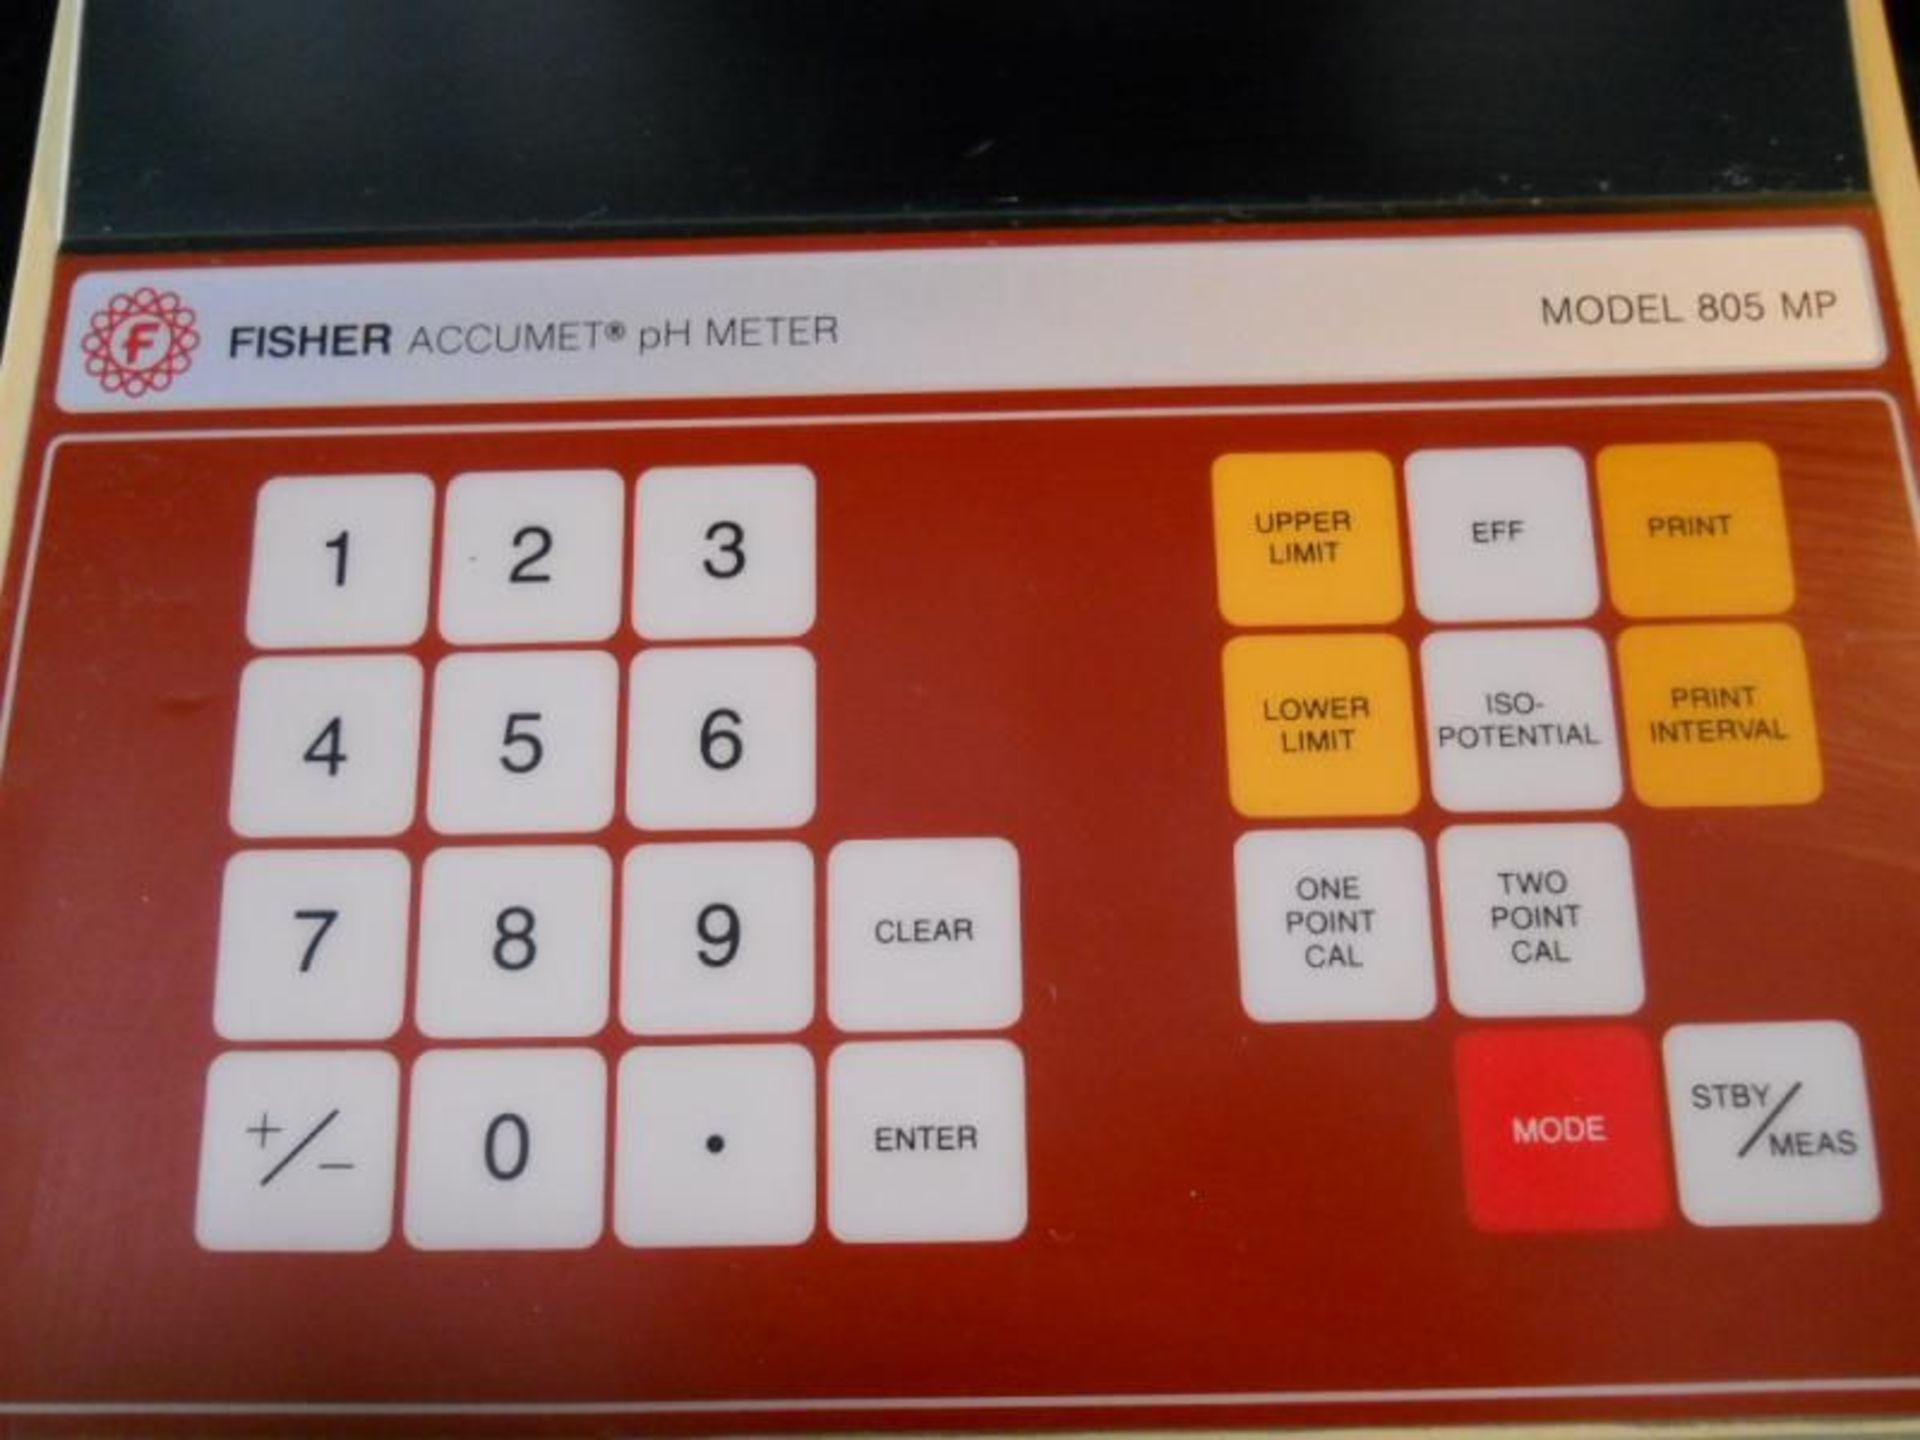 Fisher Scientific Accumet pH Meter Model 805 MP (805MP), Qty 1, 331264004313 - Image 3 of 7